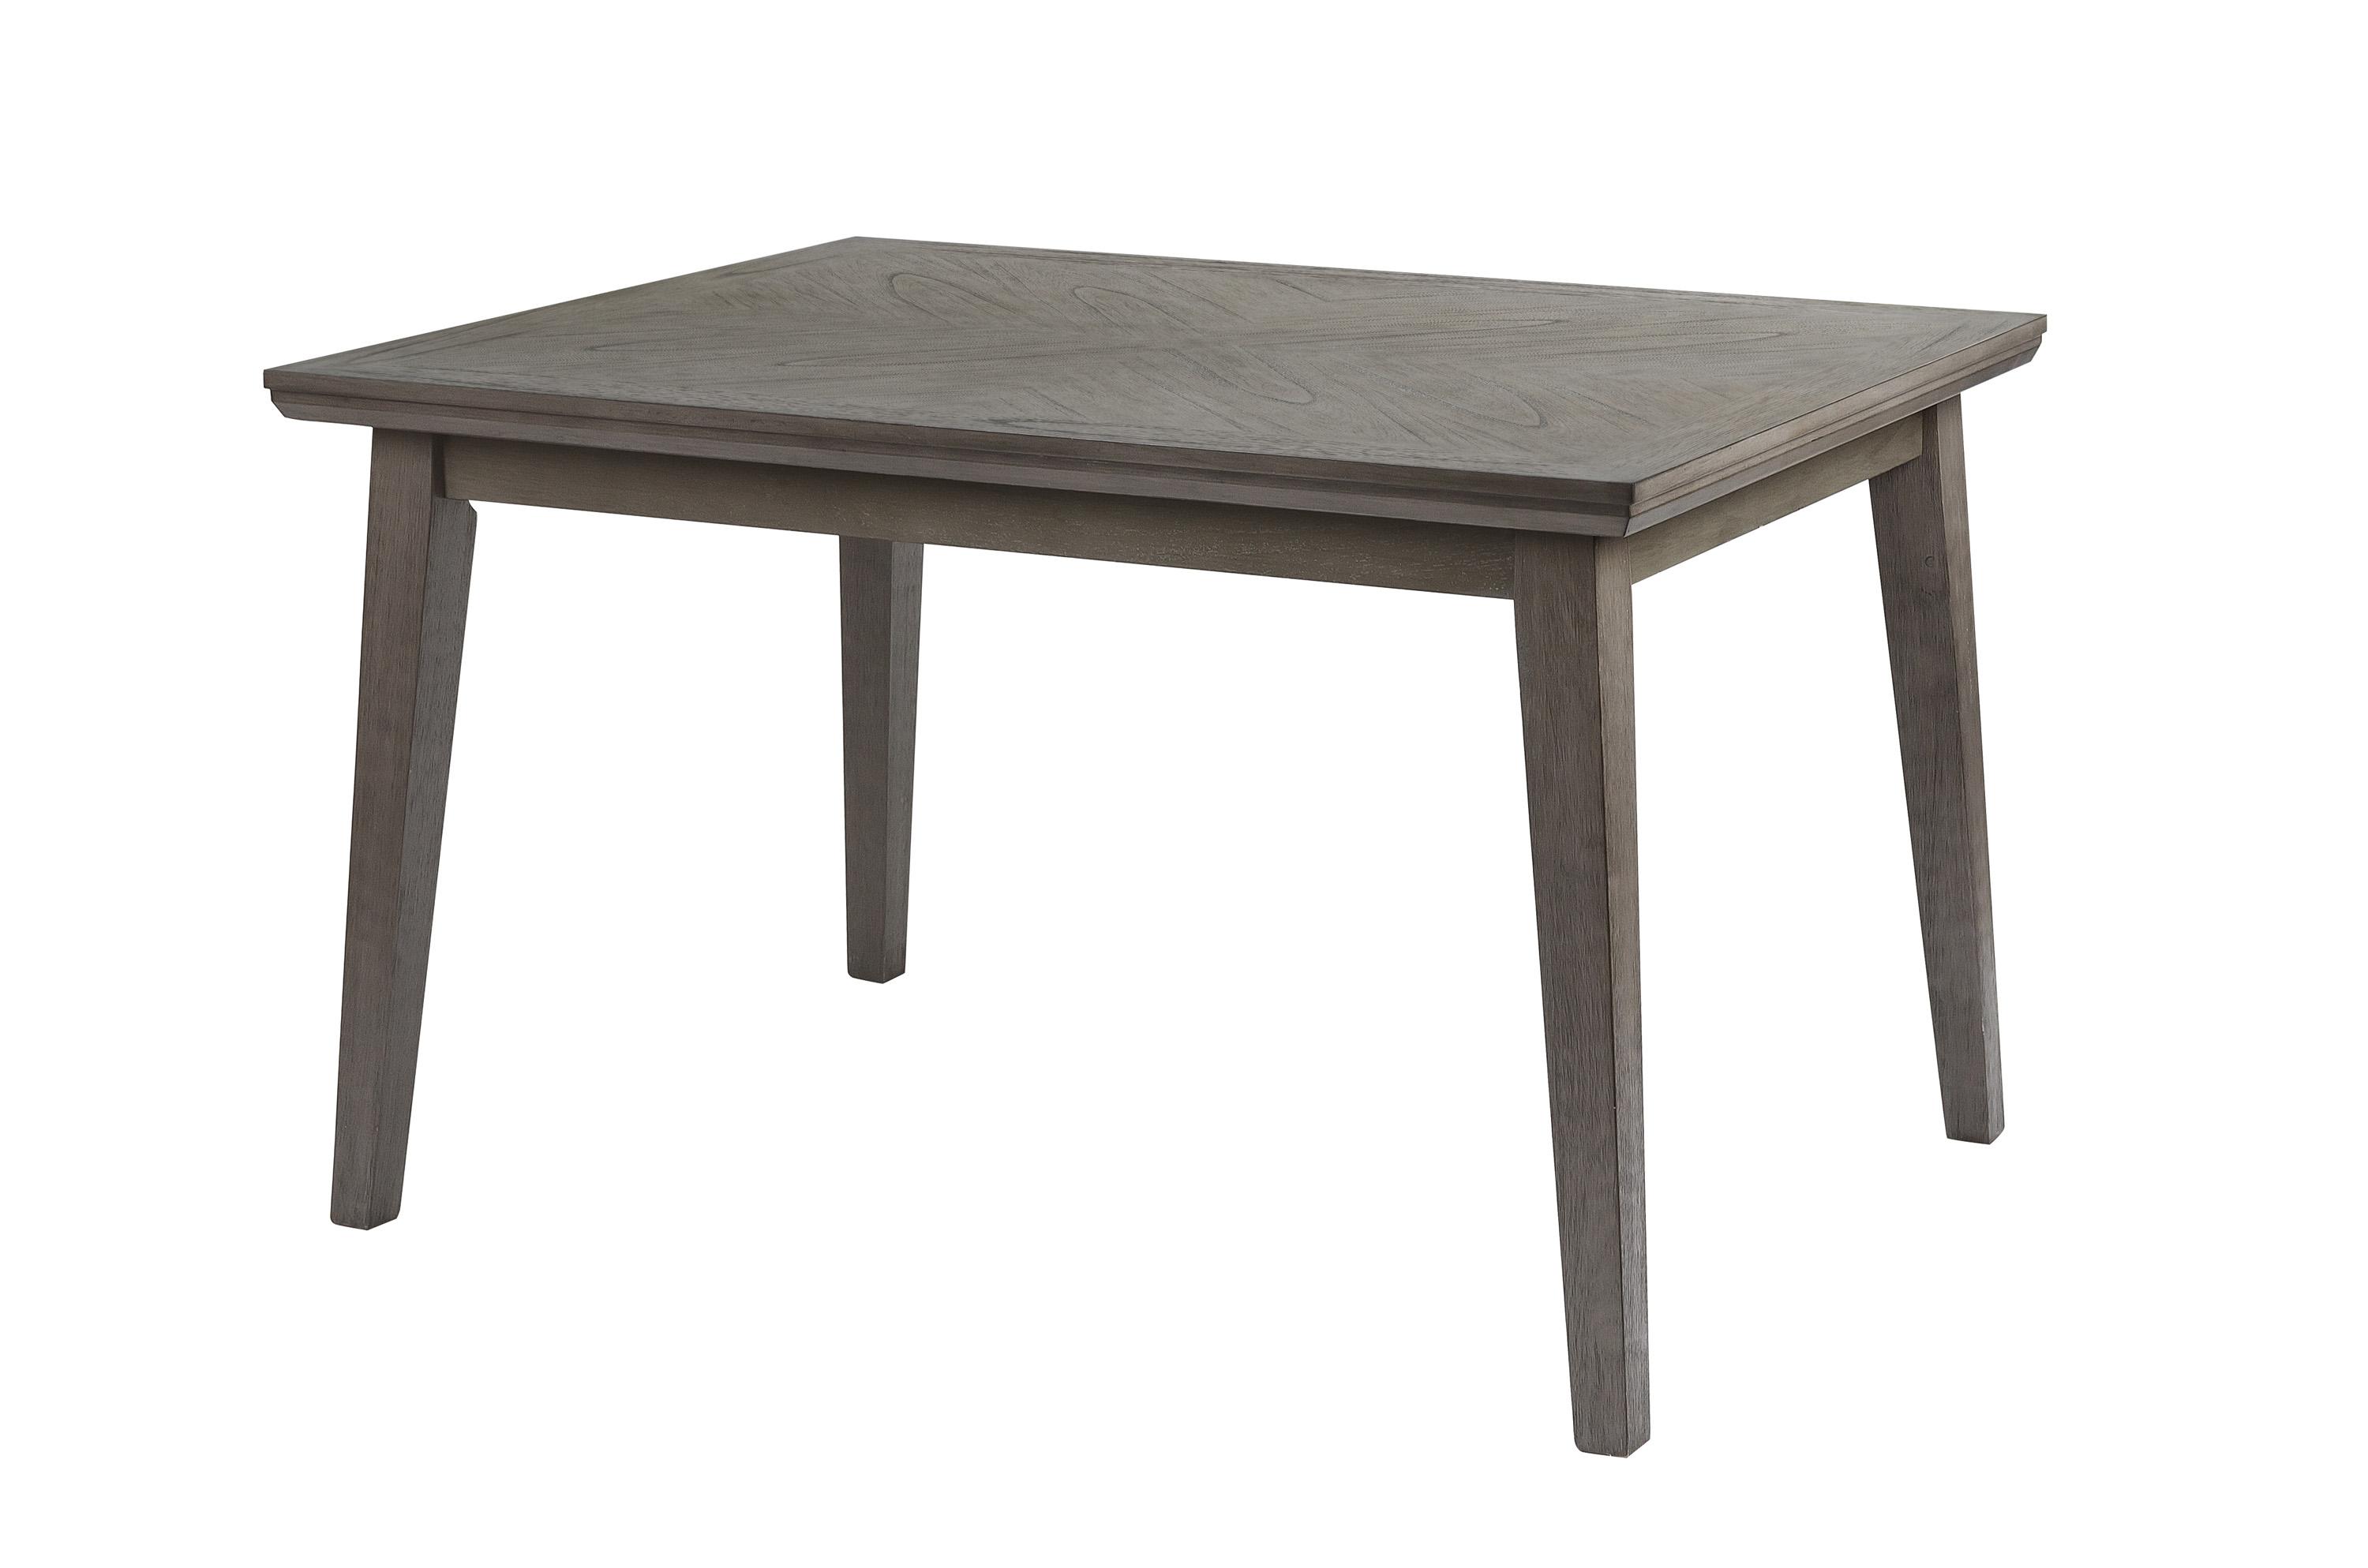 Transitional Dining Table 5163-48 University 5163-48 in Gray 